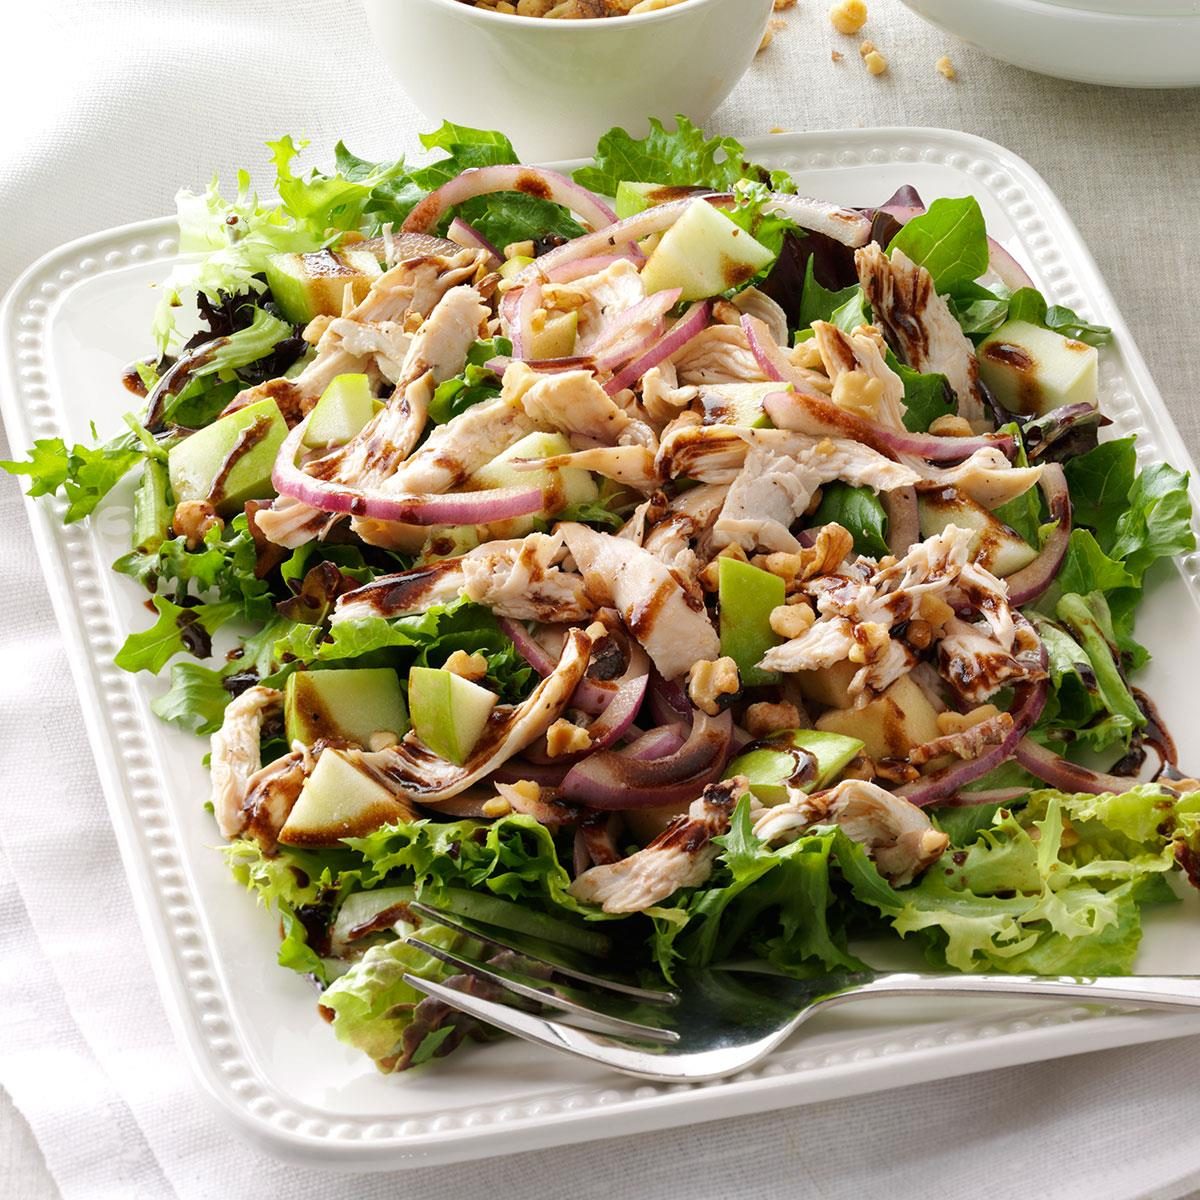 Chicken & Apple Salad with Greens Recipe: How to Make It